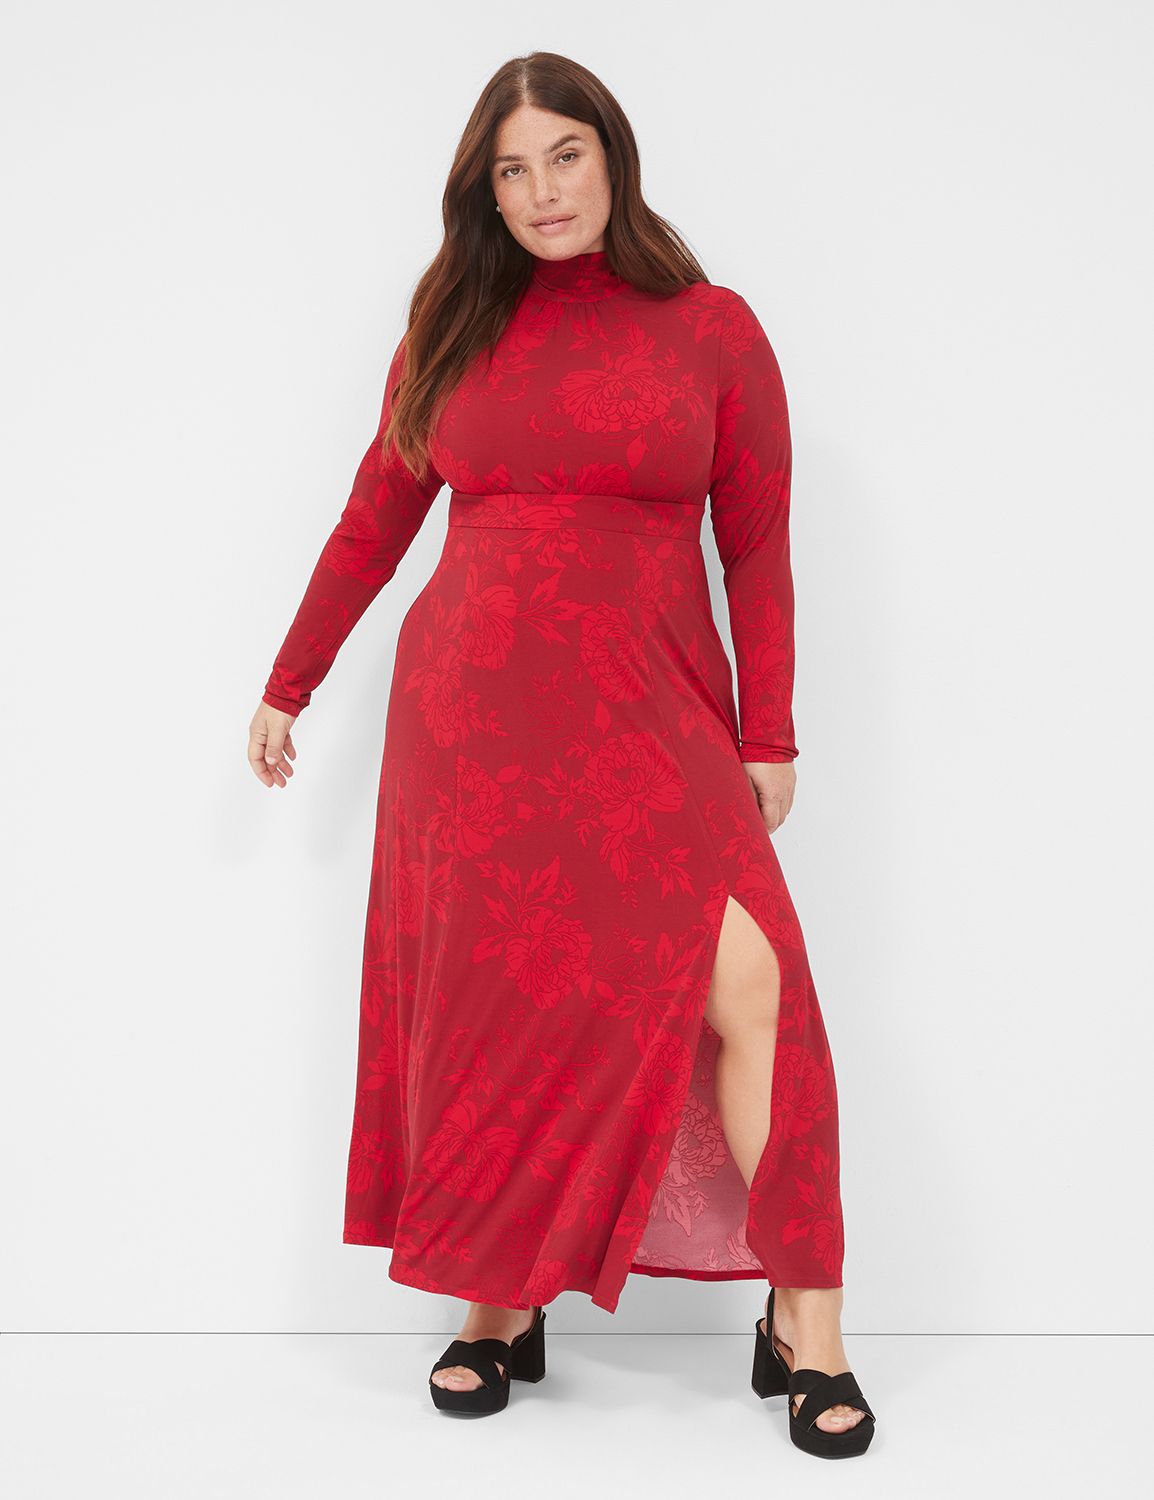 Available Online Only - Final Sale Plus Size Velvet Dress Gown